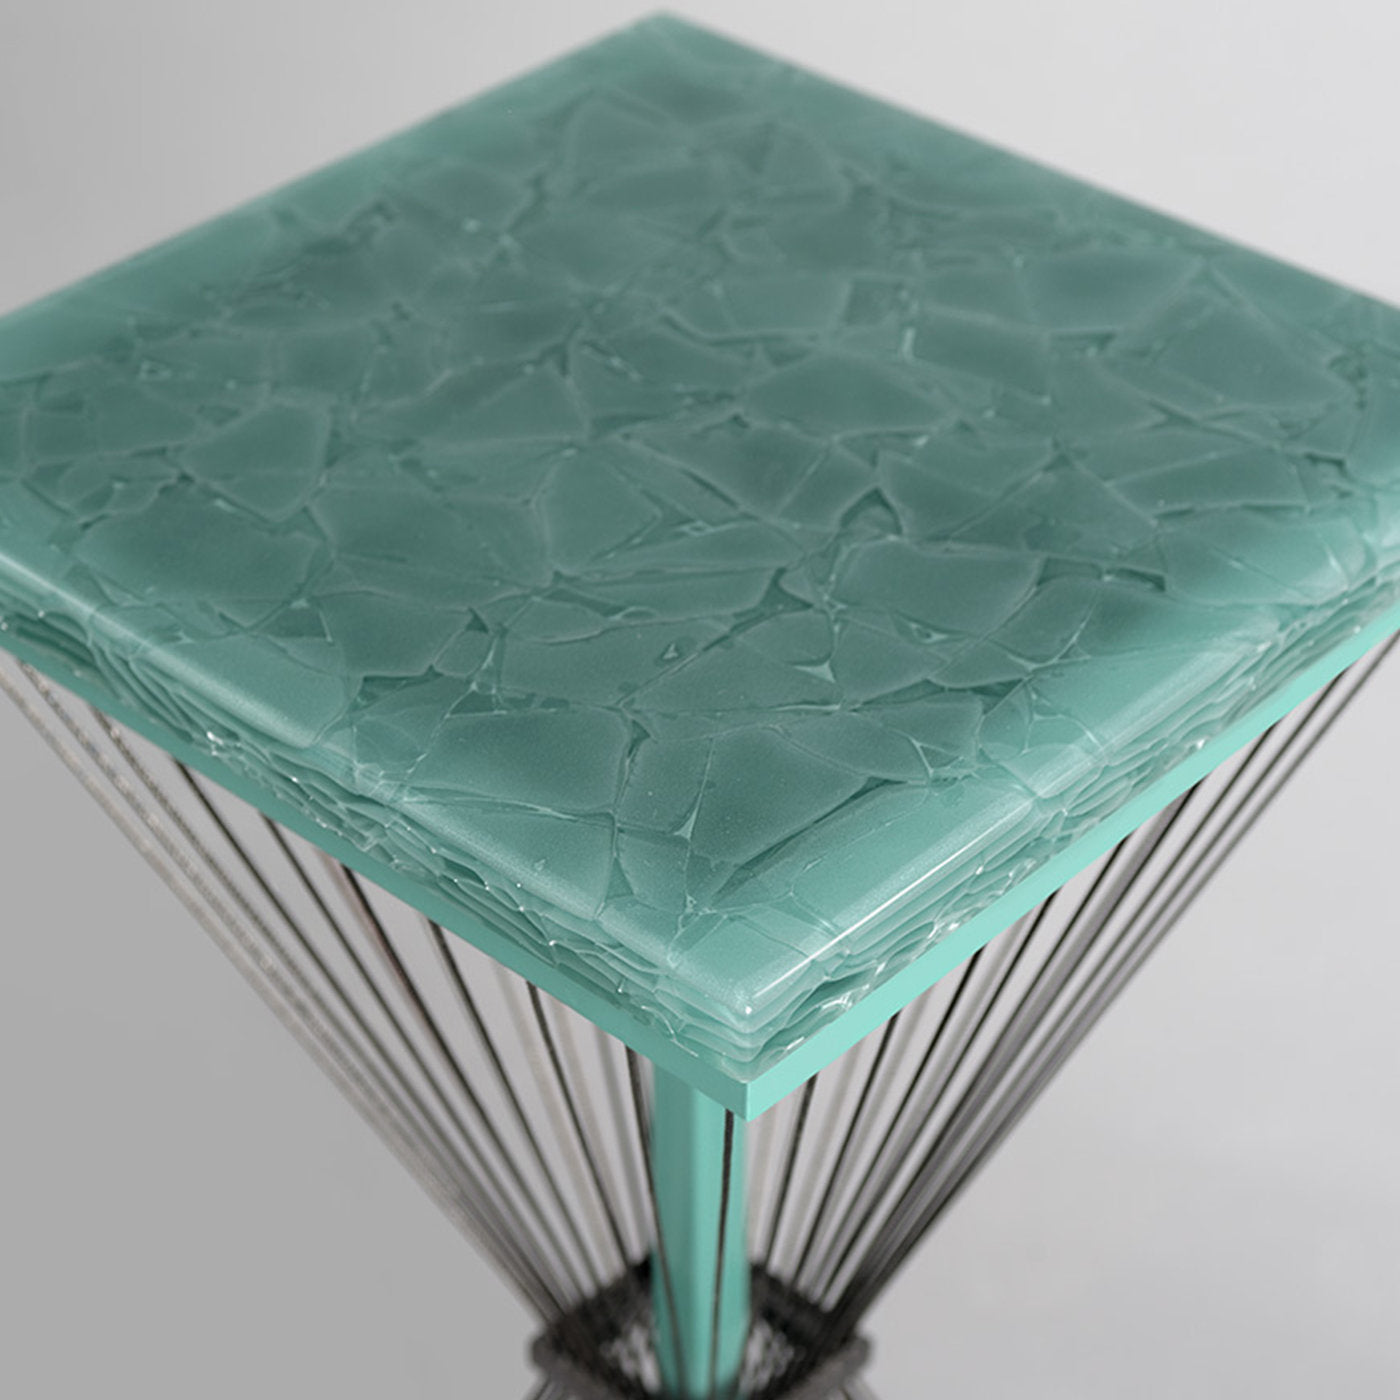 Aegis Square Cocktail Table by Ziad Alonaizy - Alternative view 1